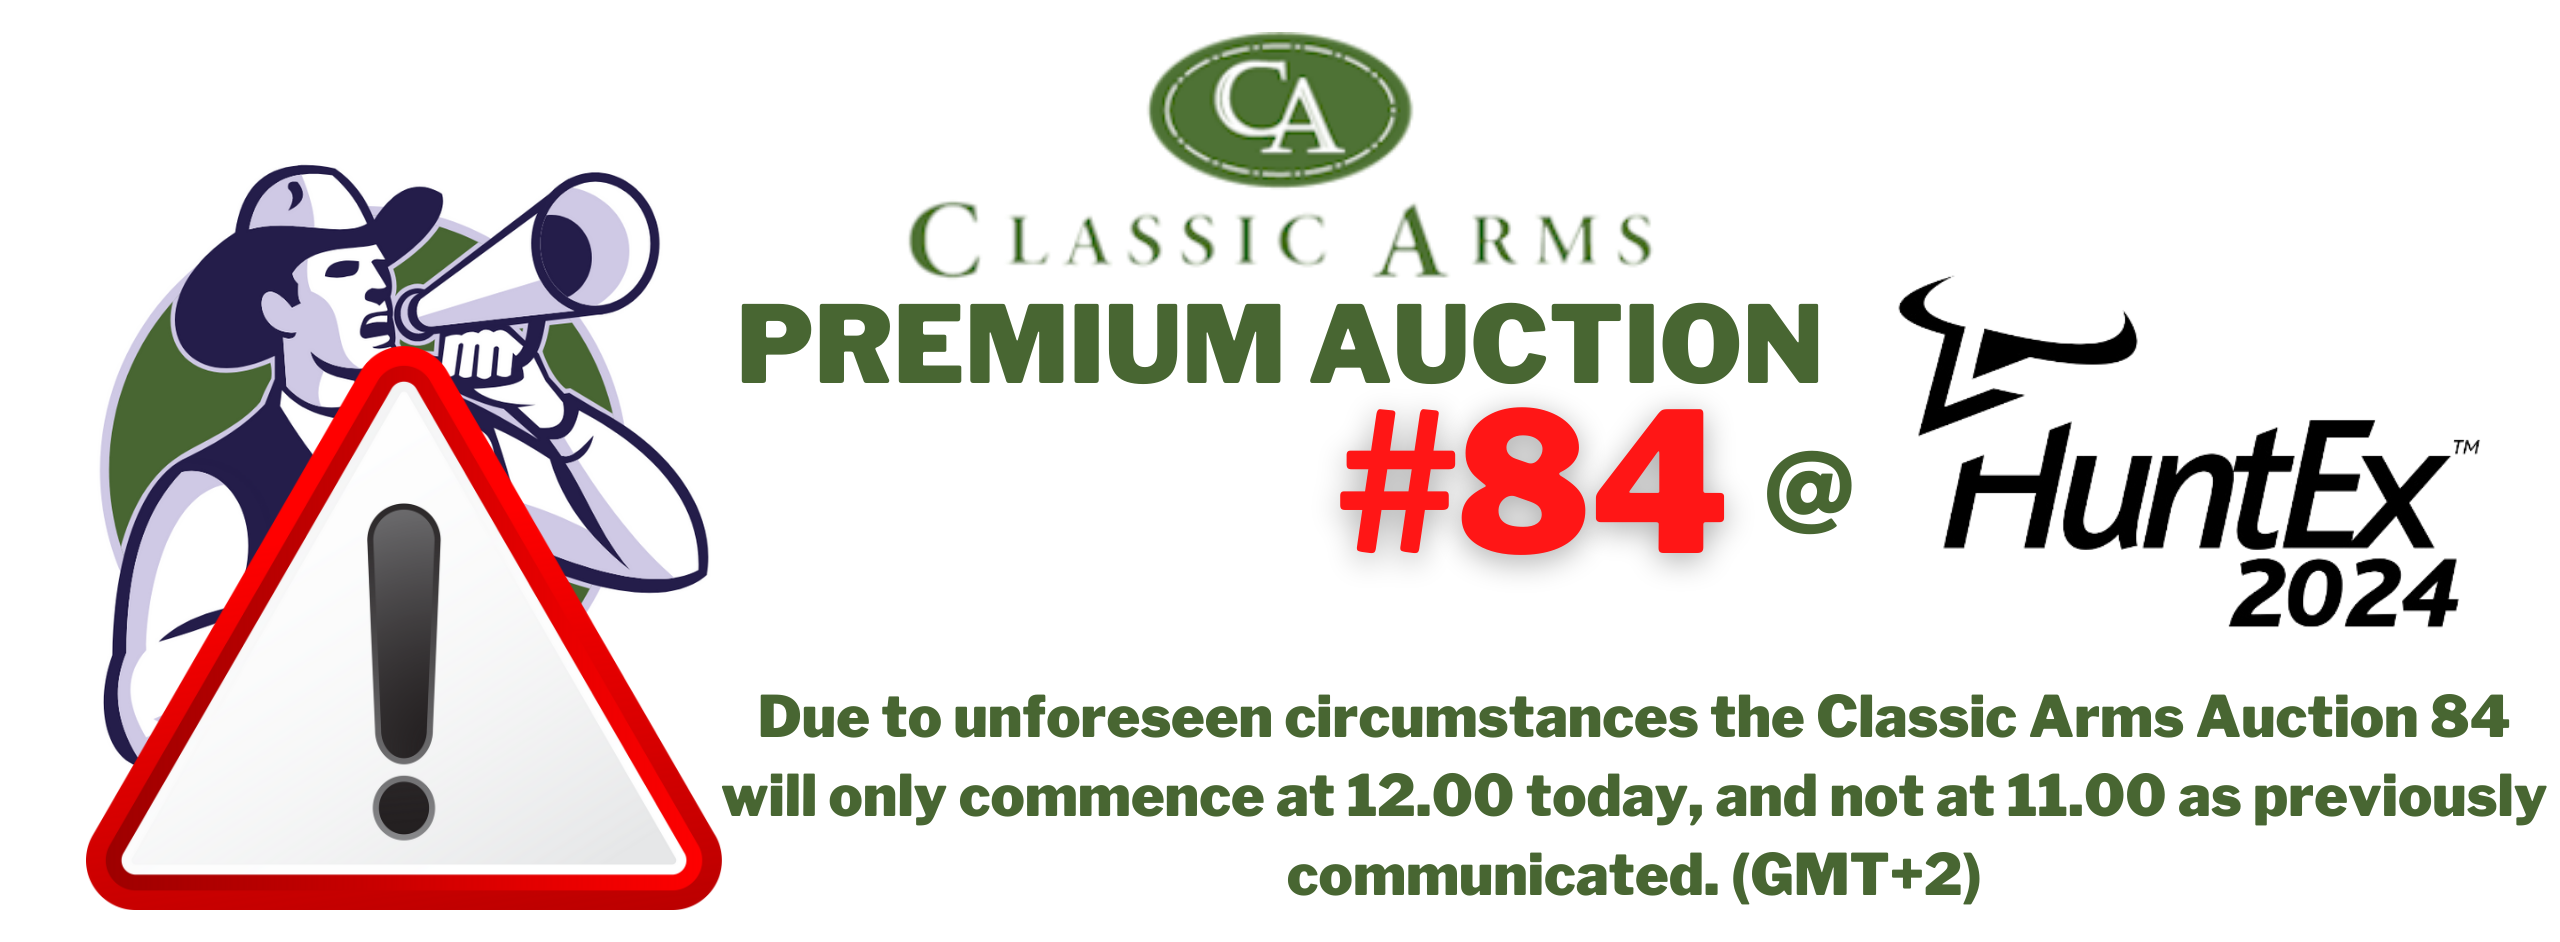 Click to open https://auction.classicarms.co.za/